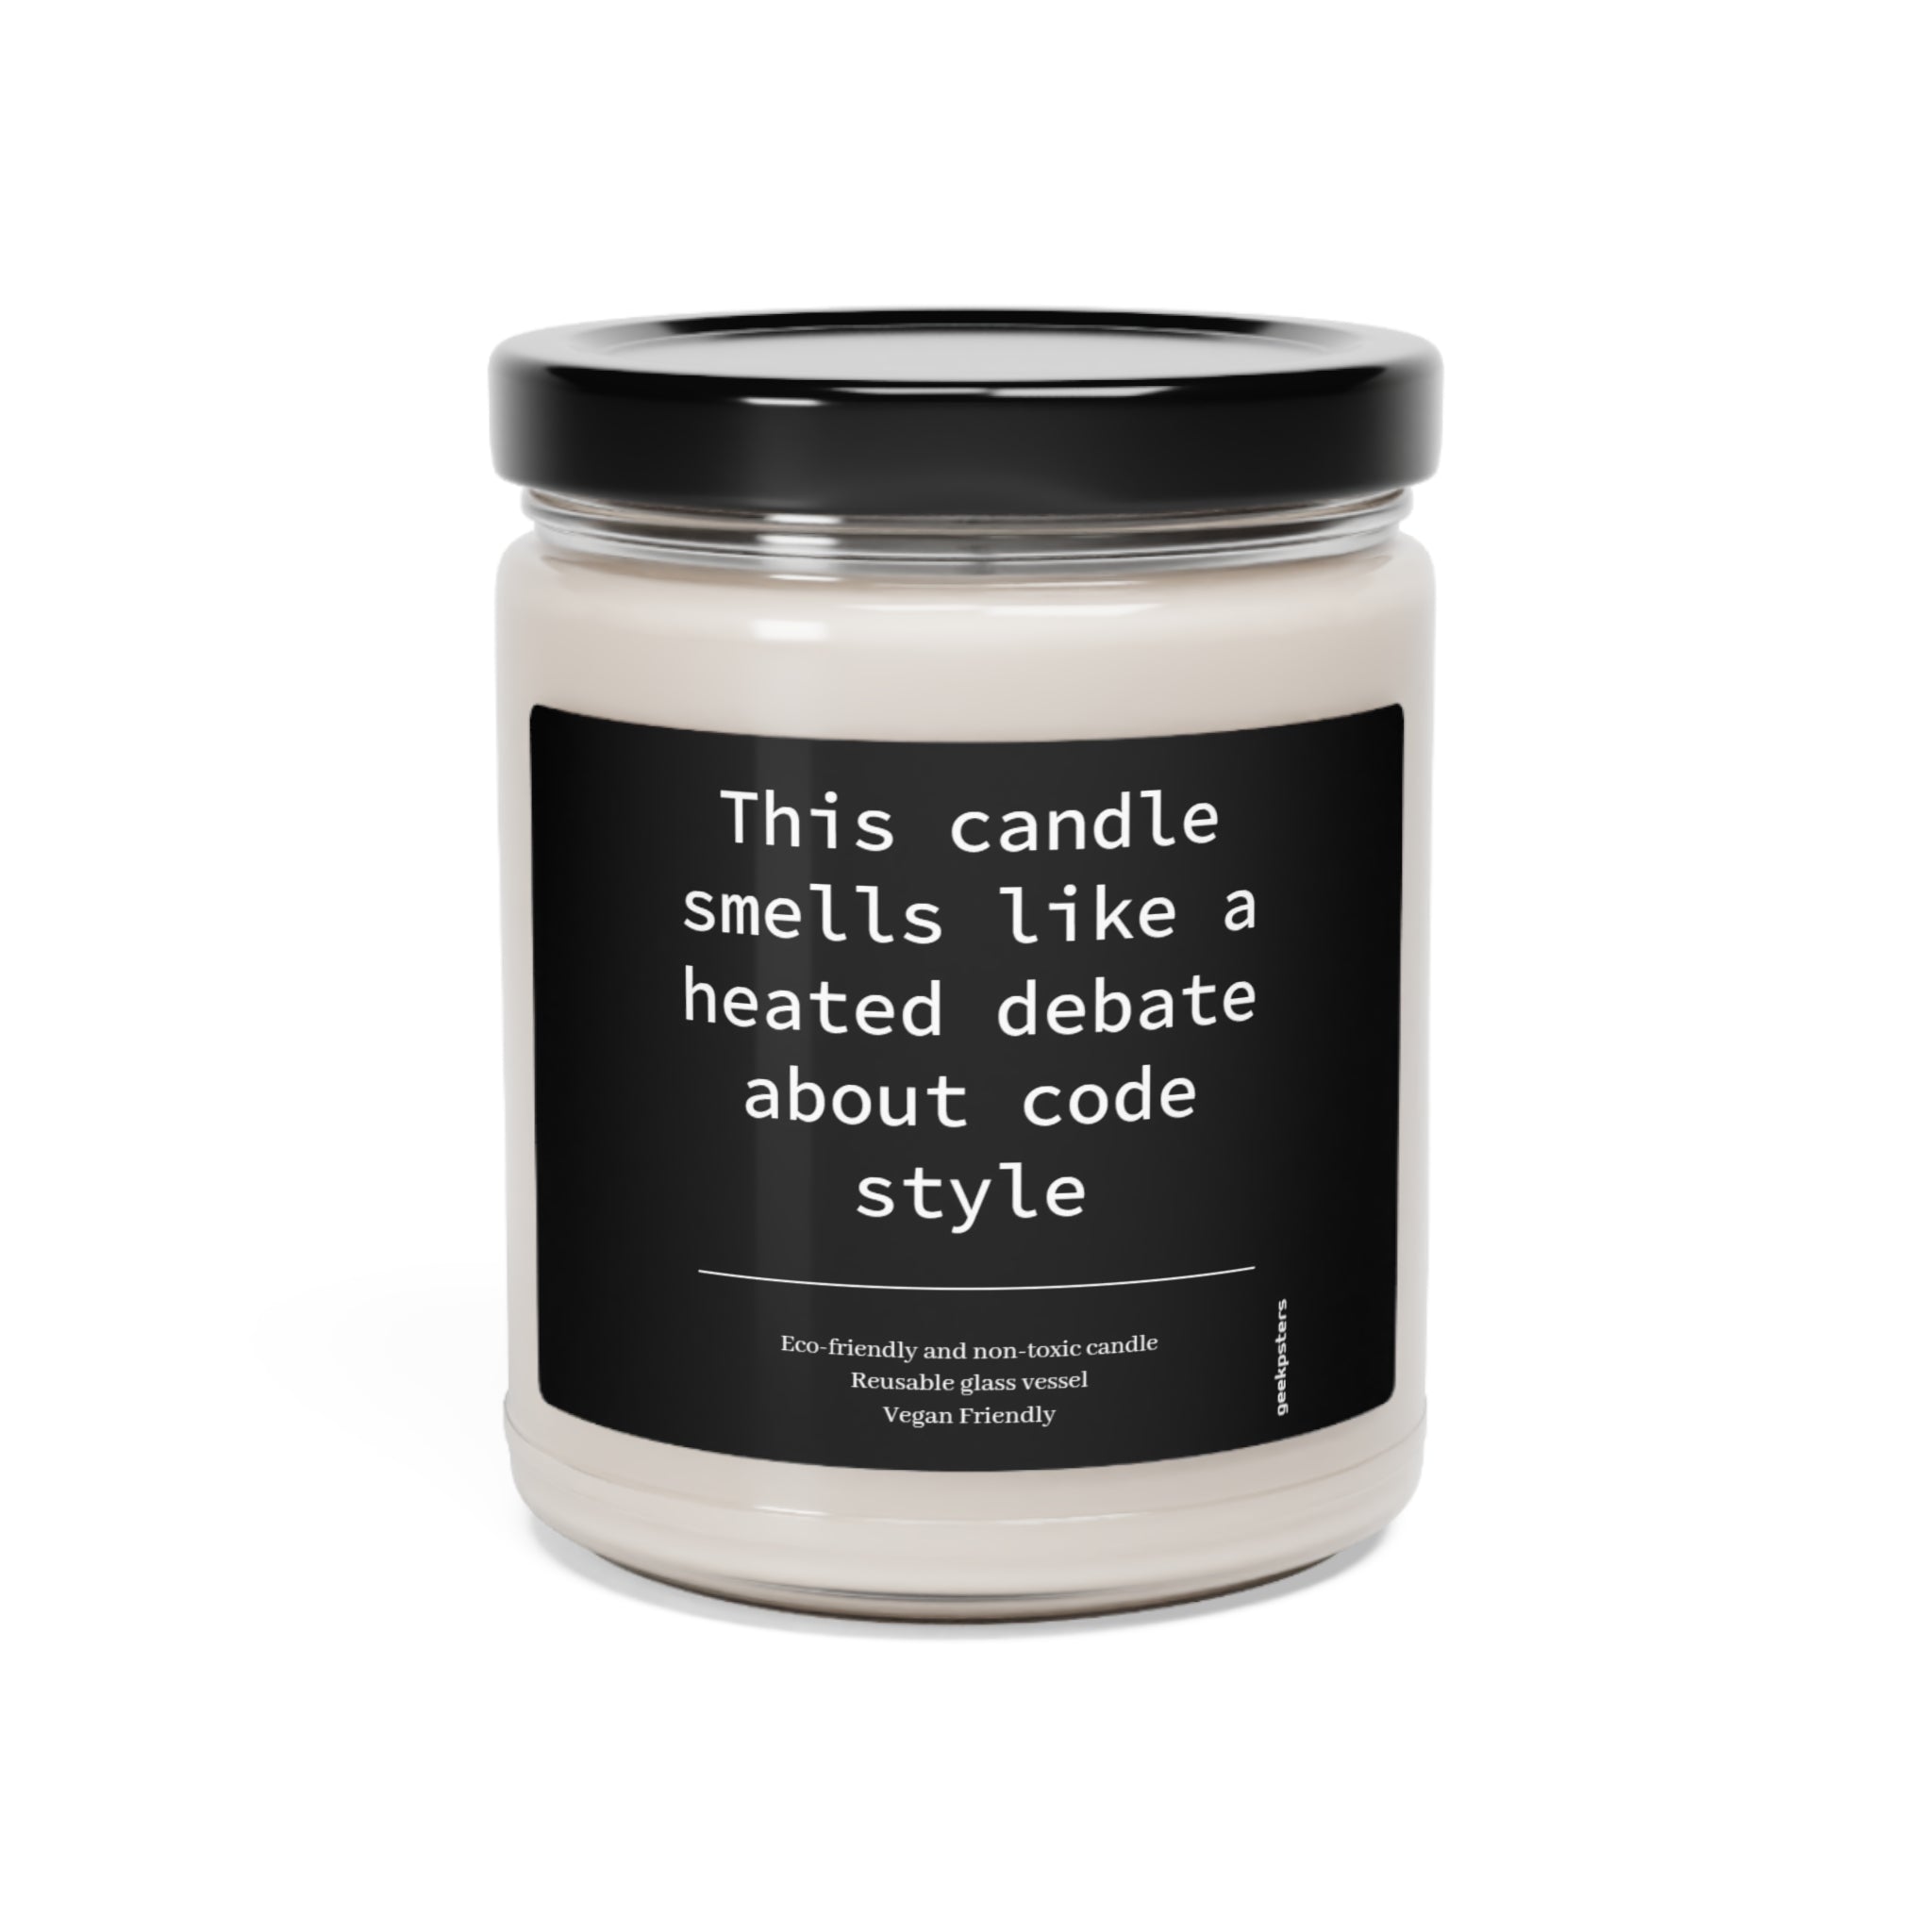 Scented candle labeled "This Candle Smells Like a Heated Debate About Code Style," indicating a humorous or oxymoronic concept, eco-friendly, and vegan-friendly, made with a natural soy wax.